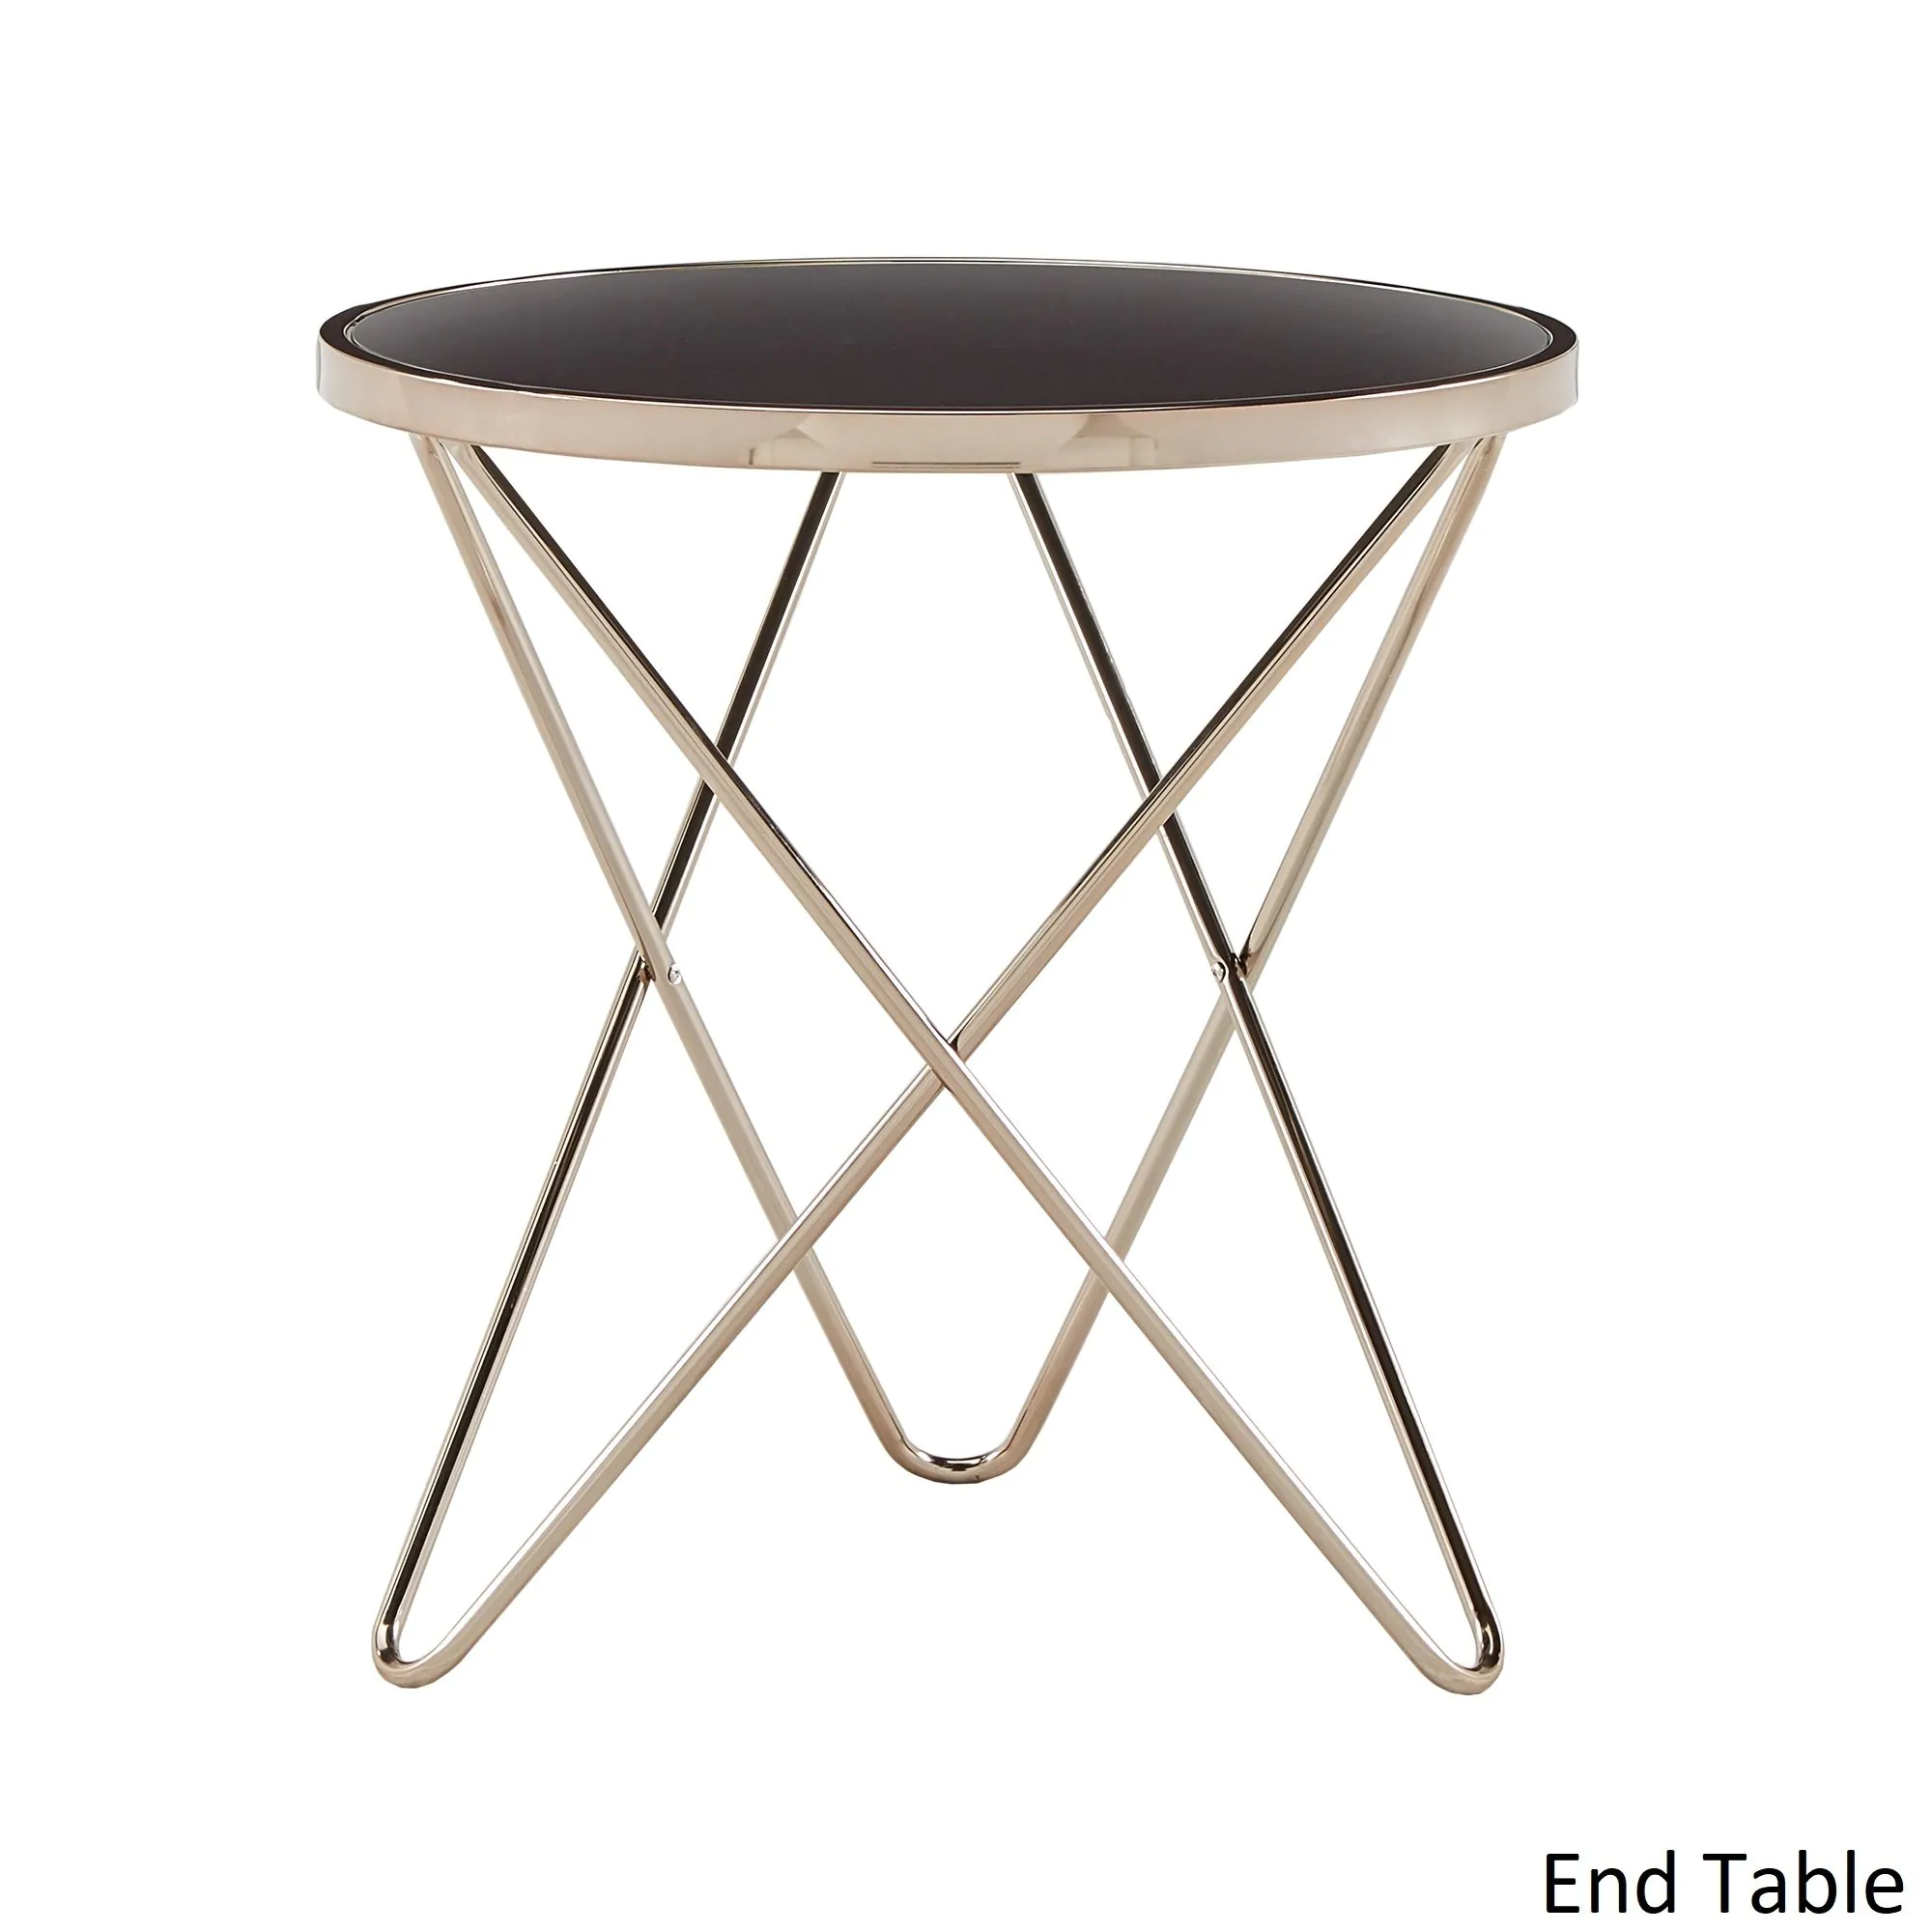 gabe champagne gold finish hairpin leg accent tables with black glass top inspire bold table free shipping today dressing ornaments pedestal plant stand indoor rustic furniture